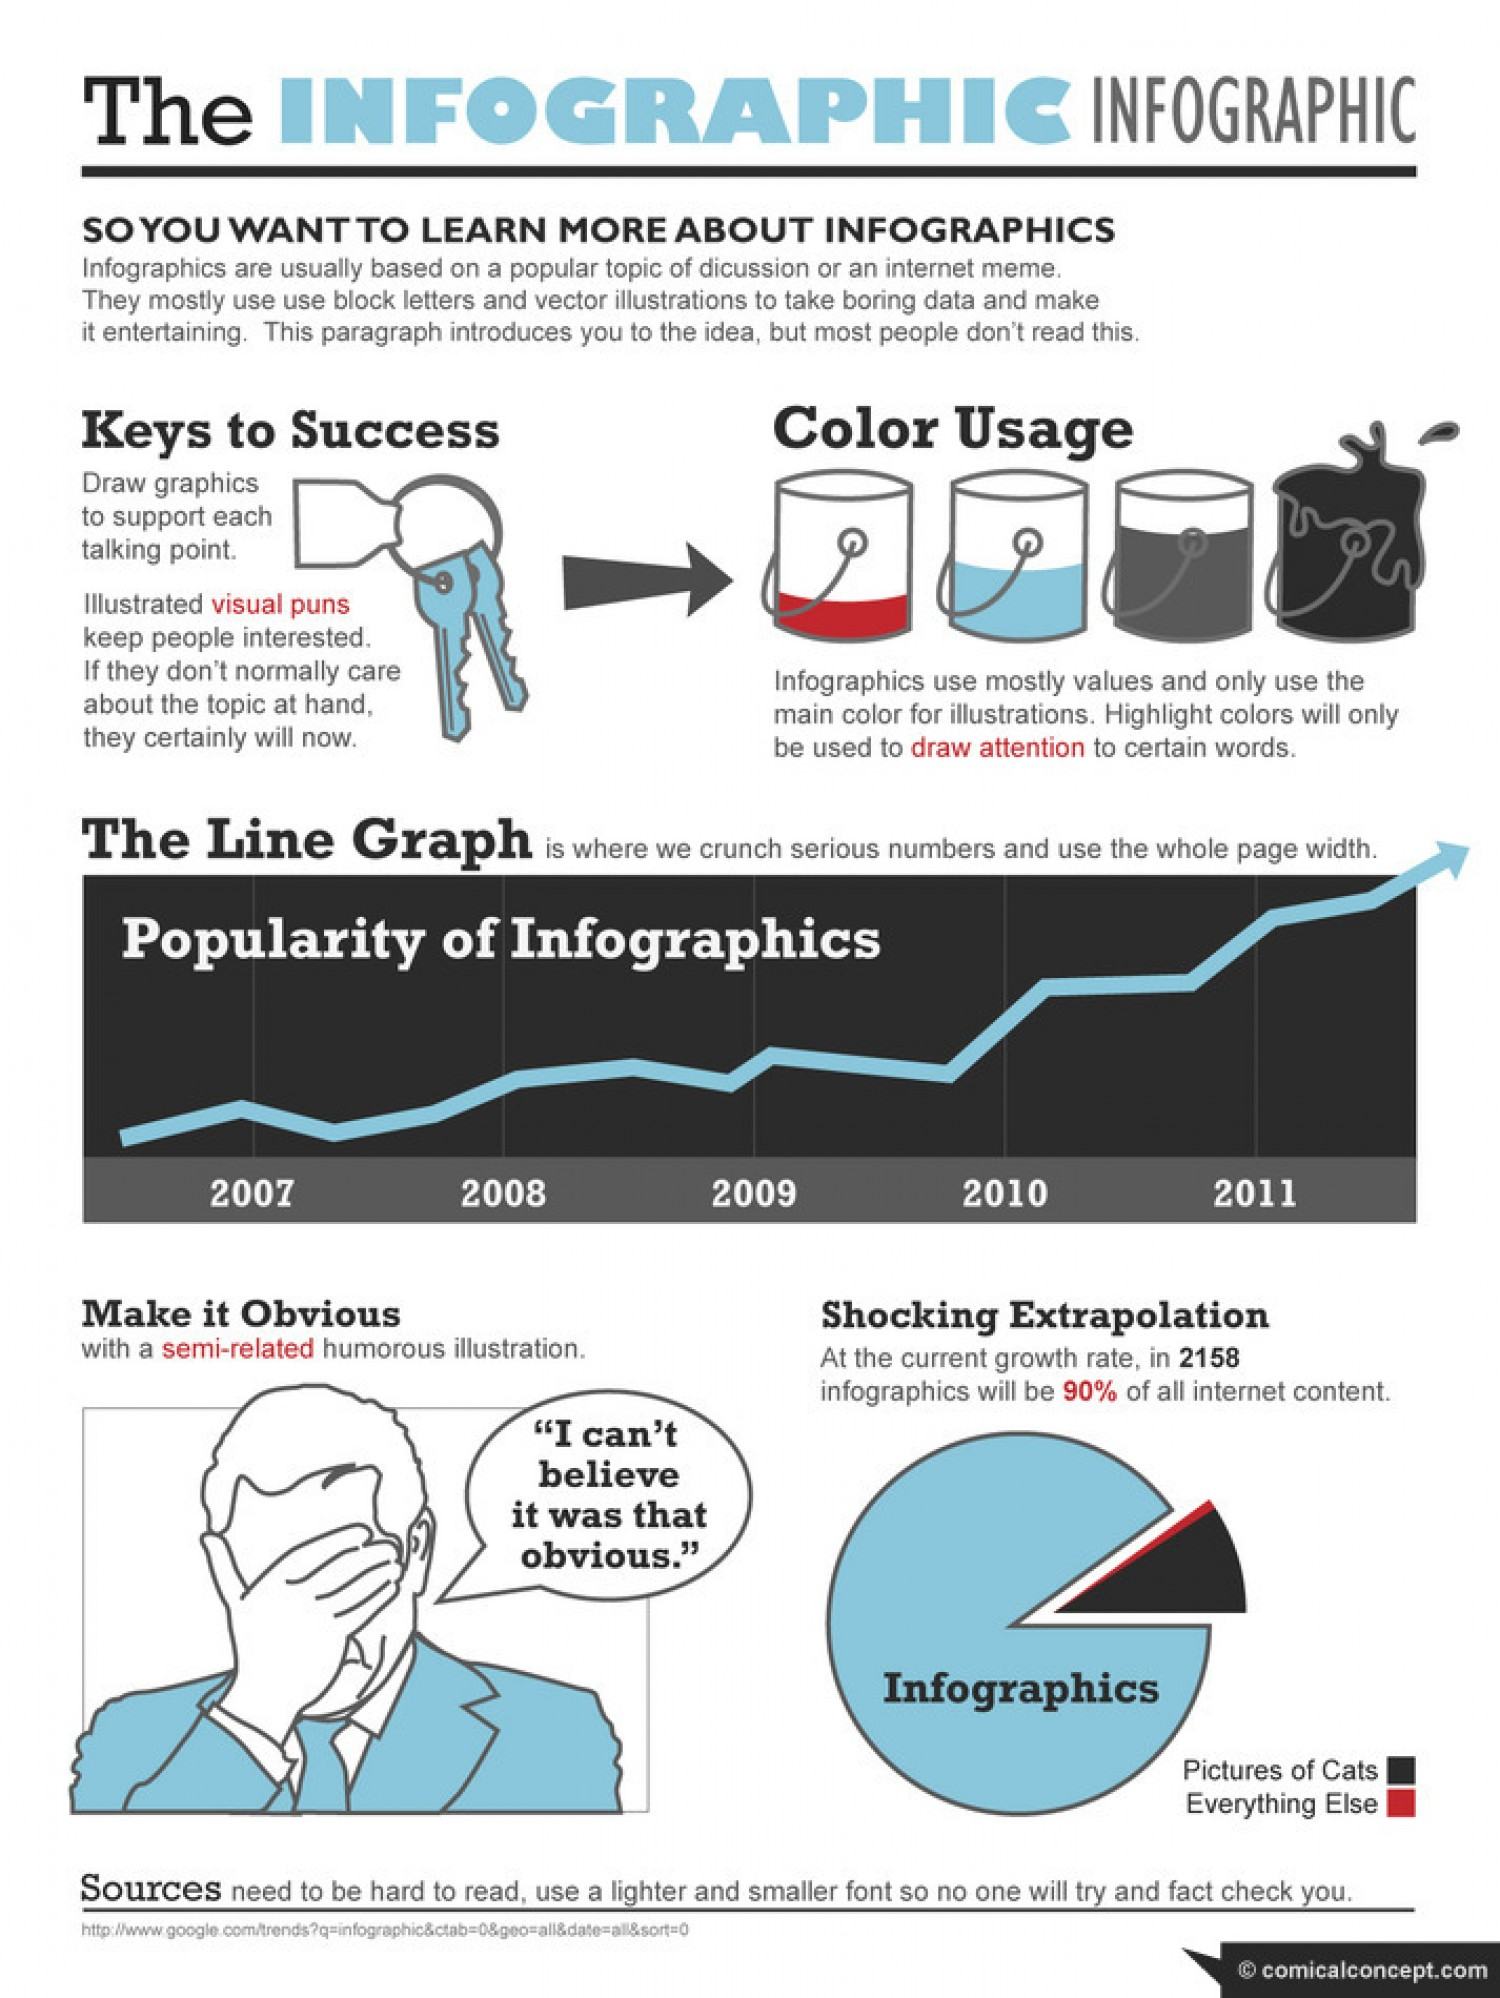 the-infographic-infographic_50290c020f9ce_w1500